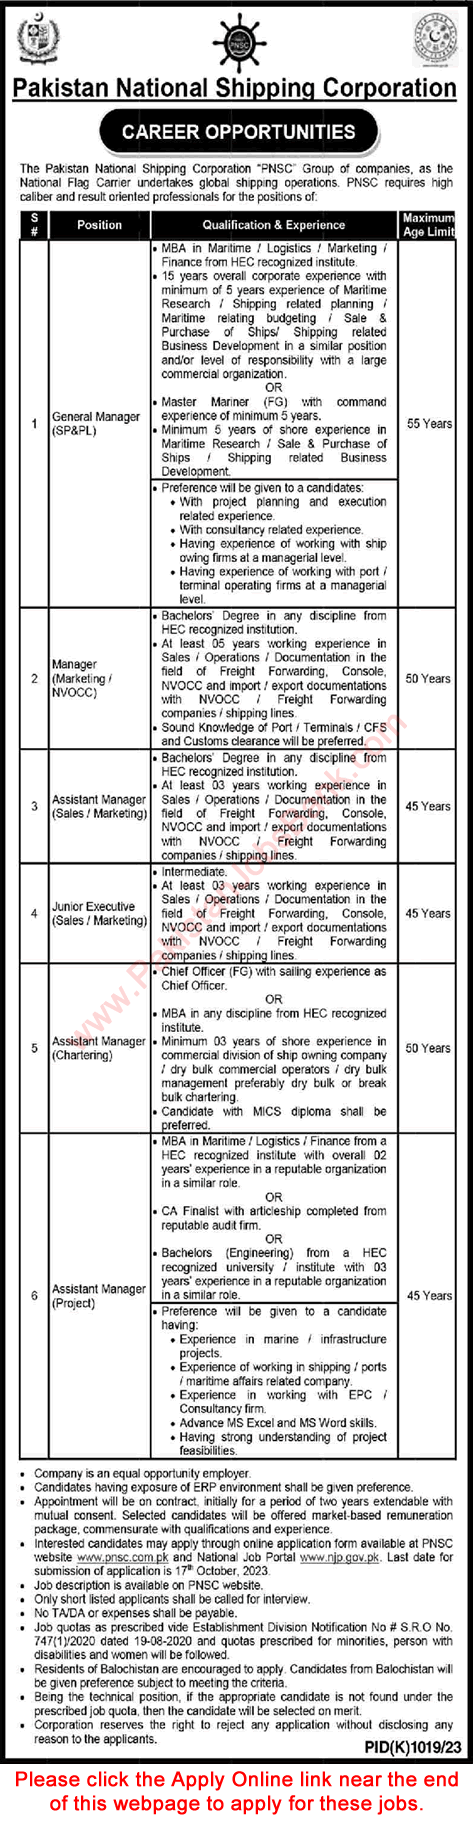 PNSC Jobs October 2023 Apply Online Assistant Managers, Junior Executive & Others Latest